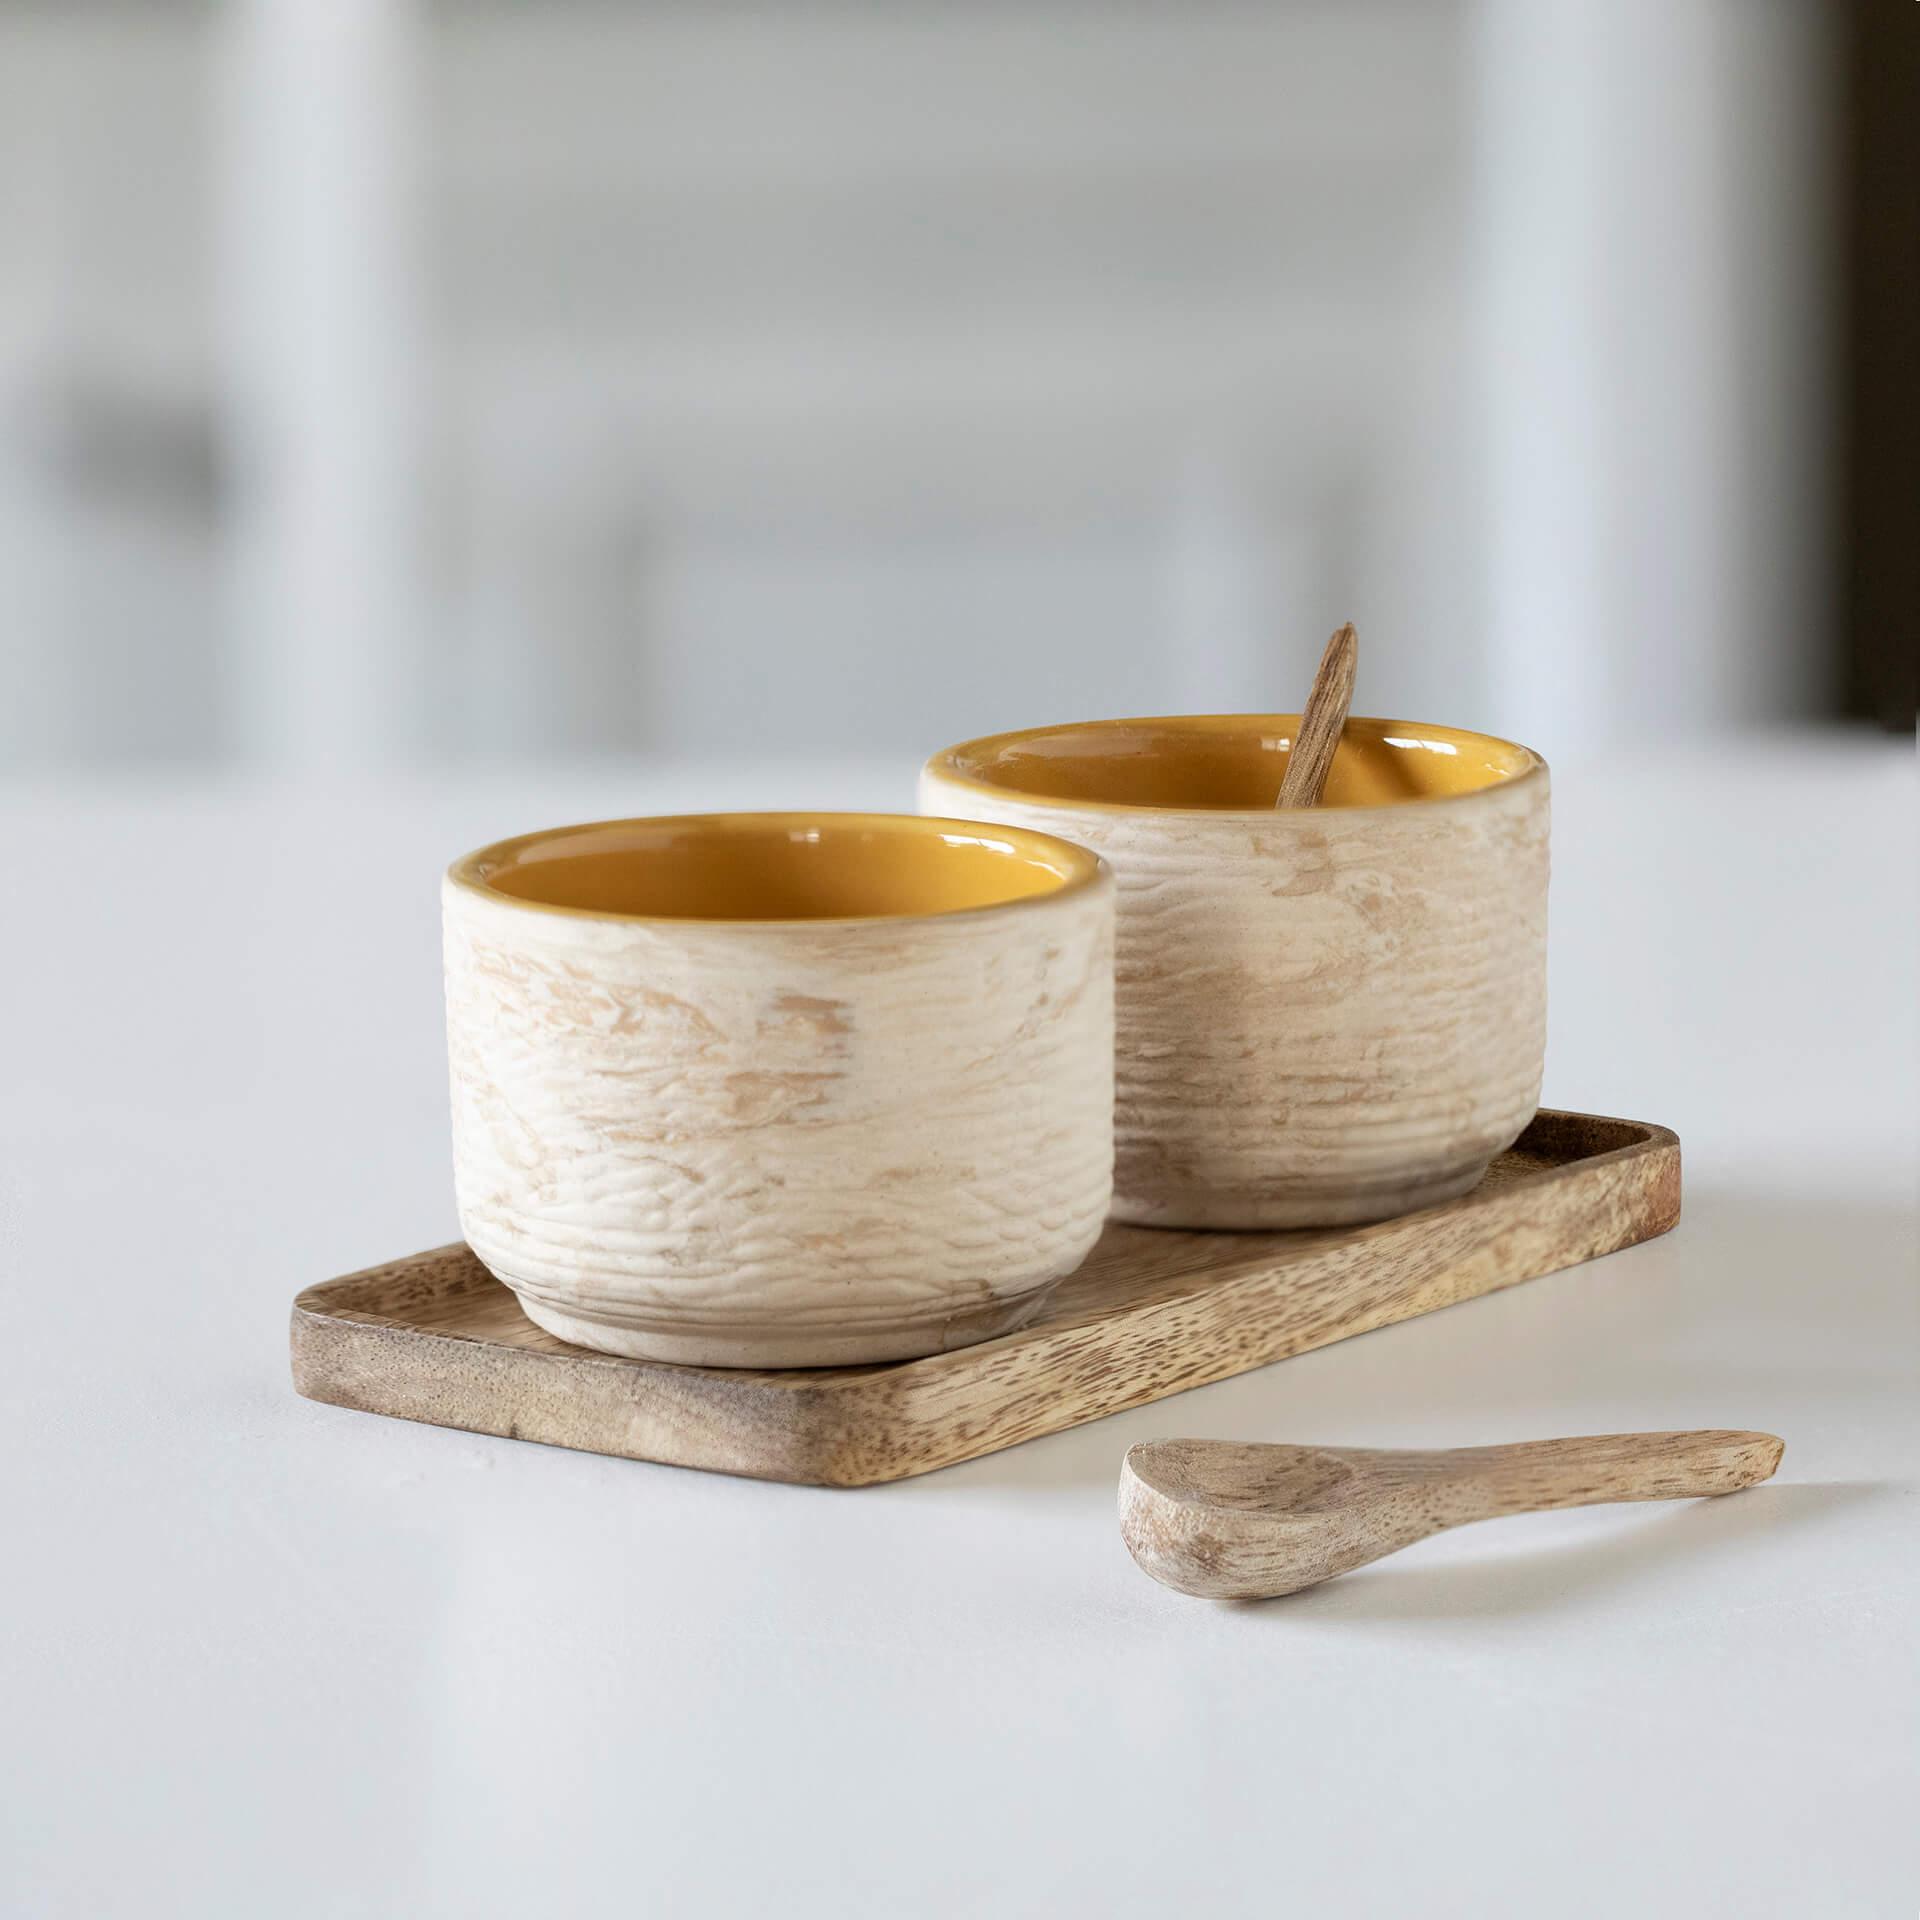 Amber Love Ceramic Condiment Set with Wooden Spoons